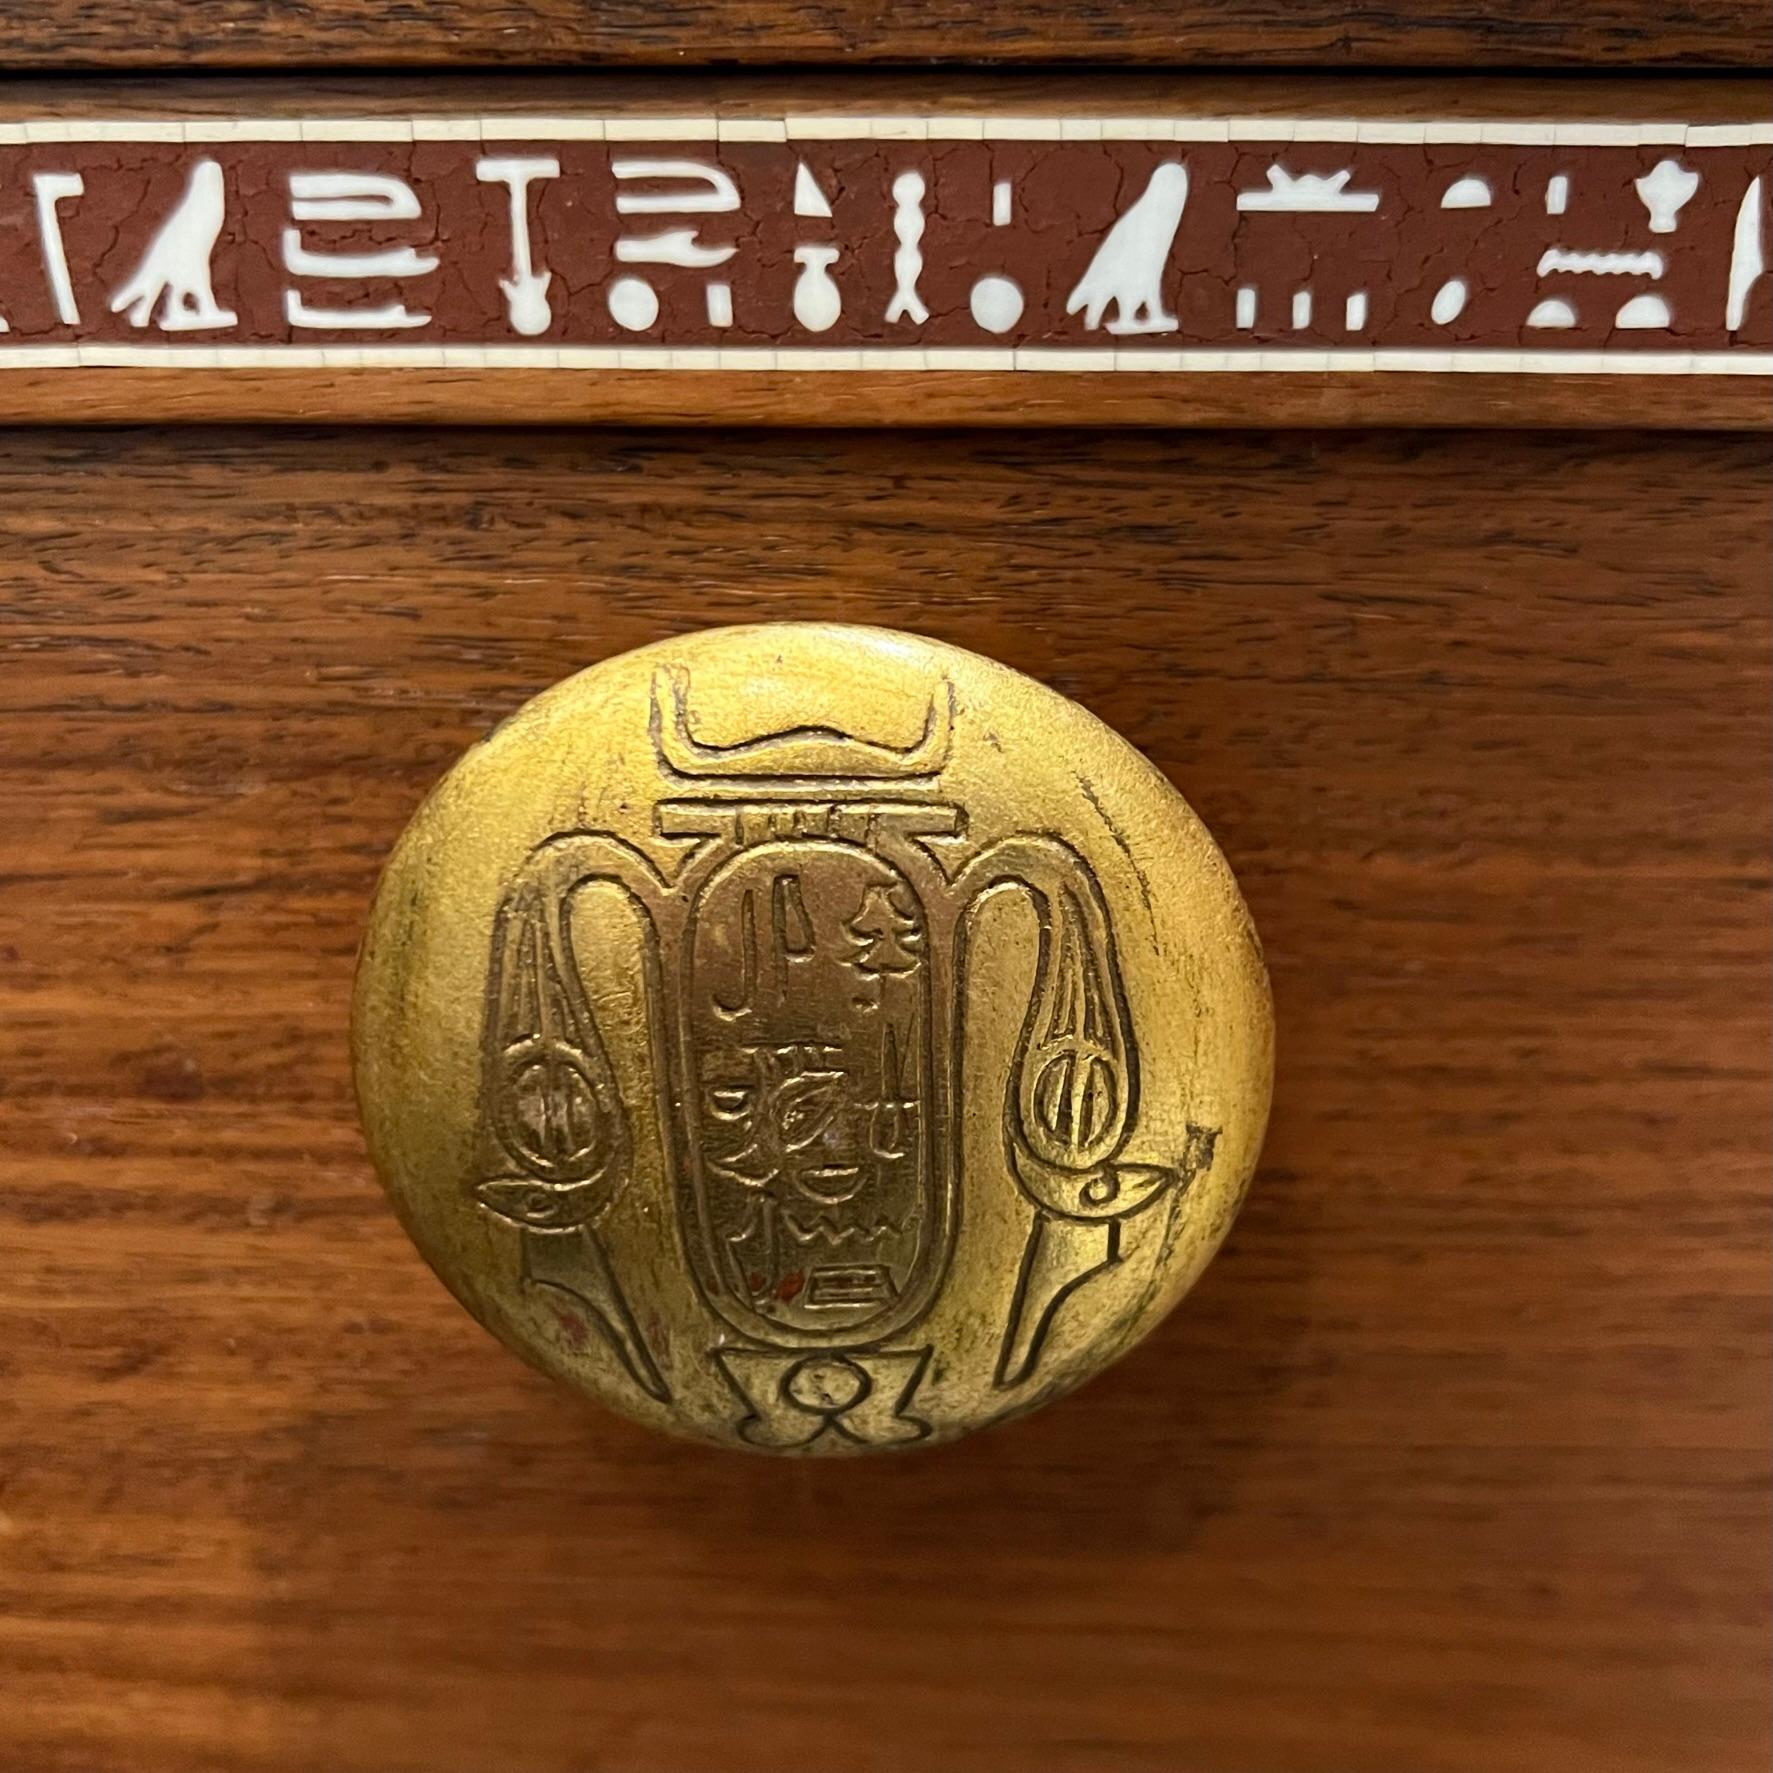 Finest Quality 1930s Reproduction of King Tutankhamun's Chest with Hieroglyphic 5